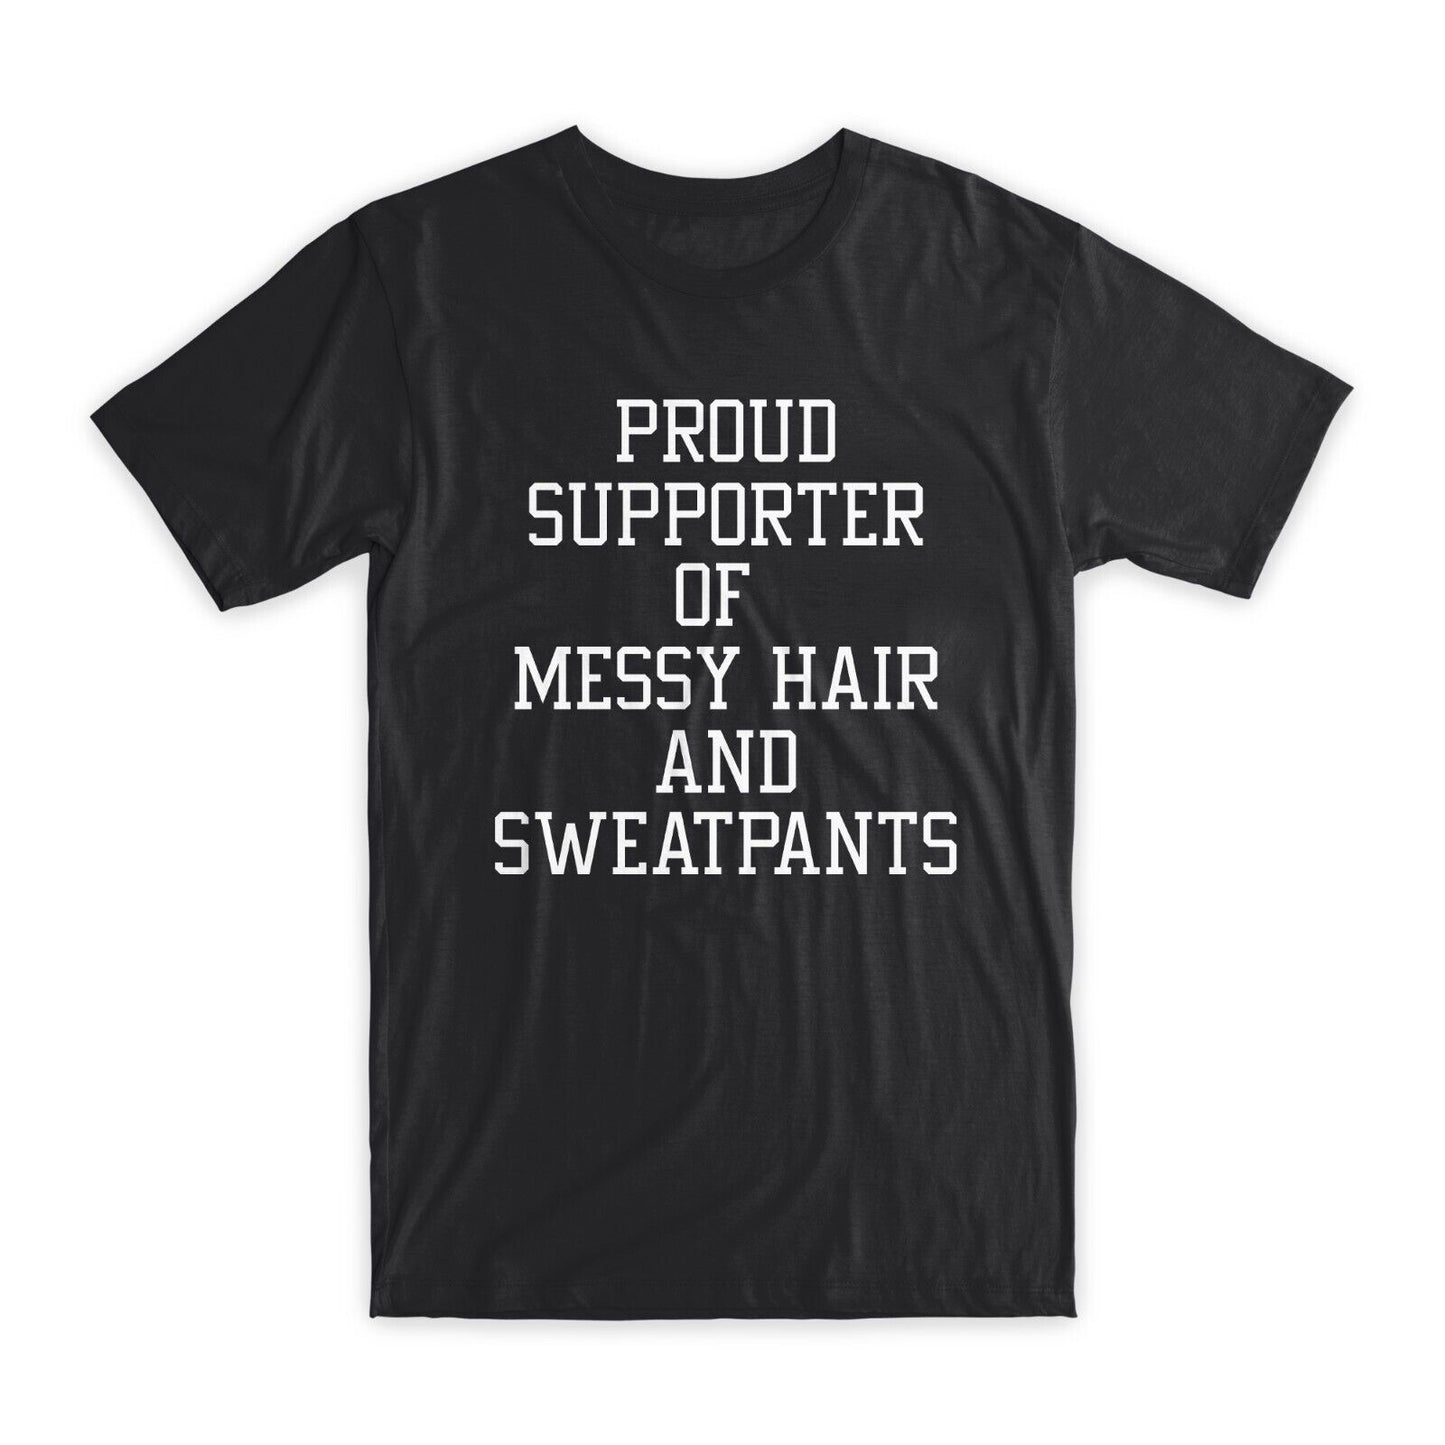 Proud Supporter of Messy Hair and Sweatpants T-Shirt Premium Cotton Funny T NEW